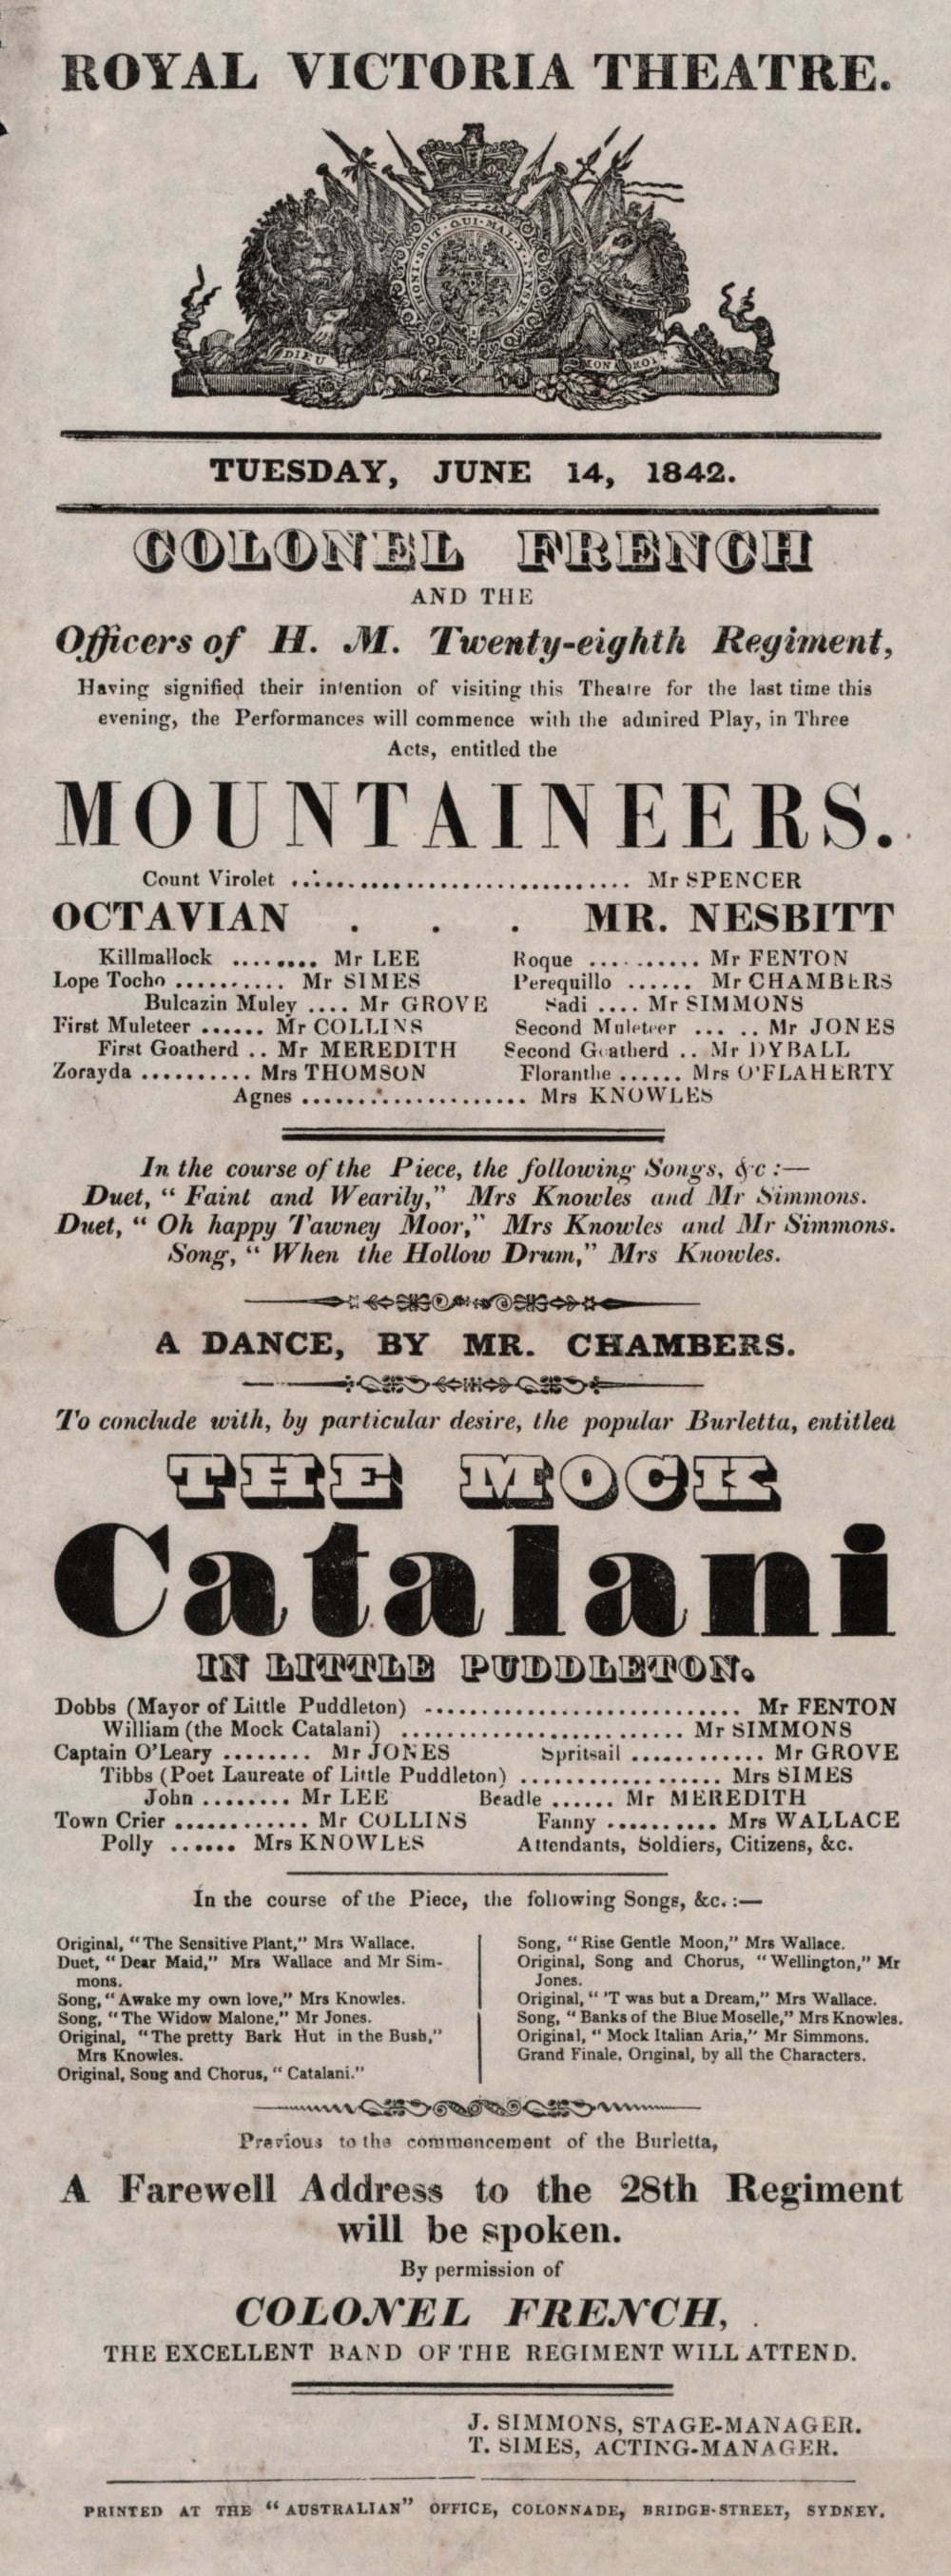 Playbill, Royal Victoria Theatre. Tuesday, June 14, 1842; National Library of Australia